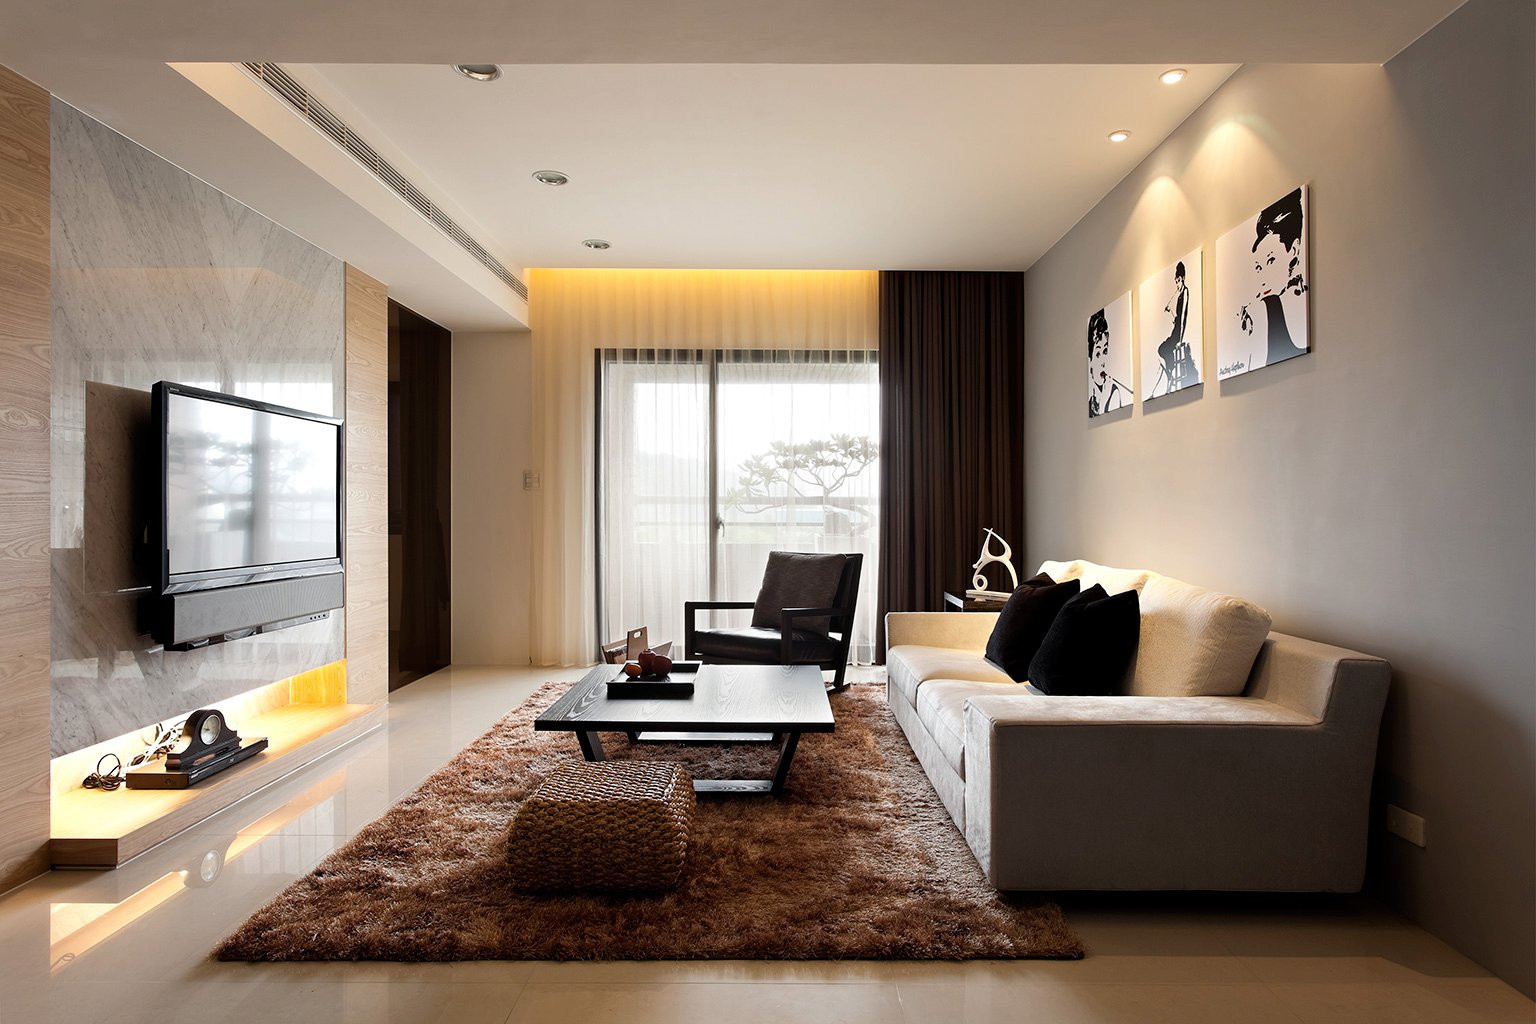 Home Decor Pictures Living Room
 Modern Minimalist Decor with a Homey Flow